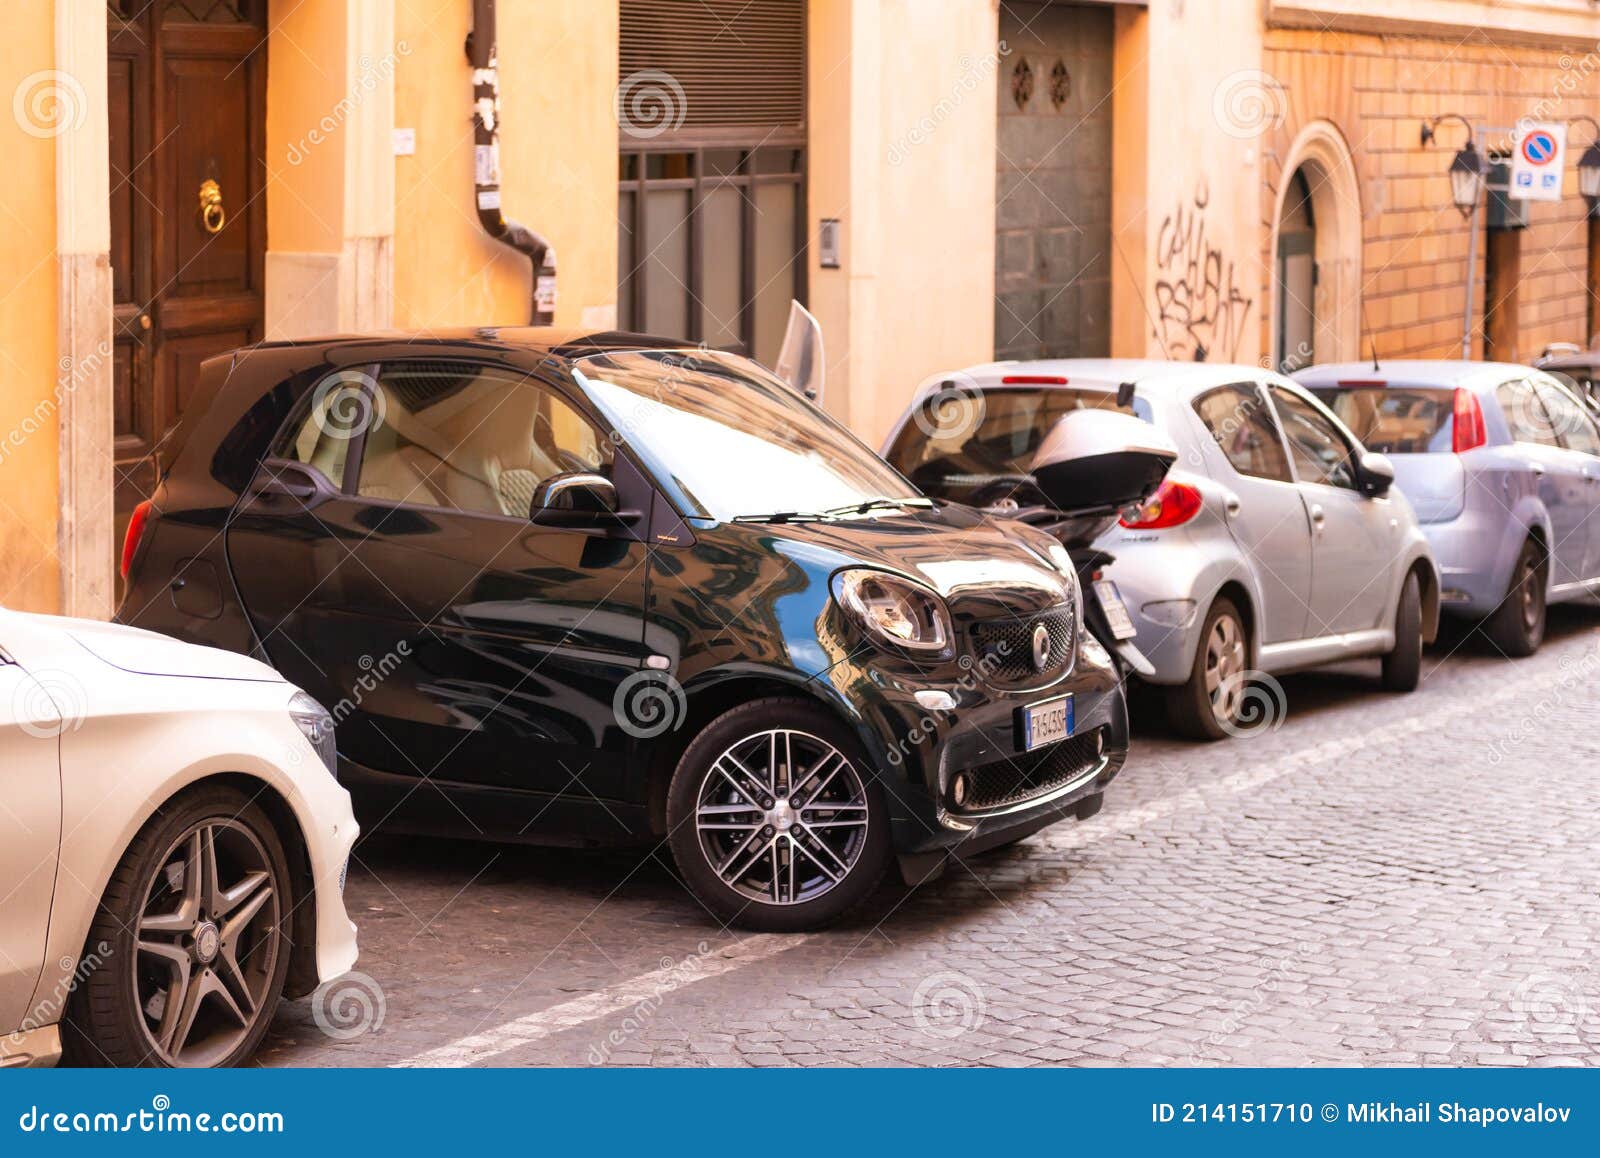 L'industrie automobile au Maroc - Page 19 Rome-italy-spring-parking-small-car-perpendicular-to-parallel-marking-parking-small-streets-rome-214151710